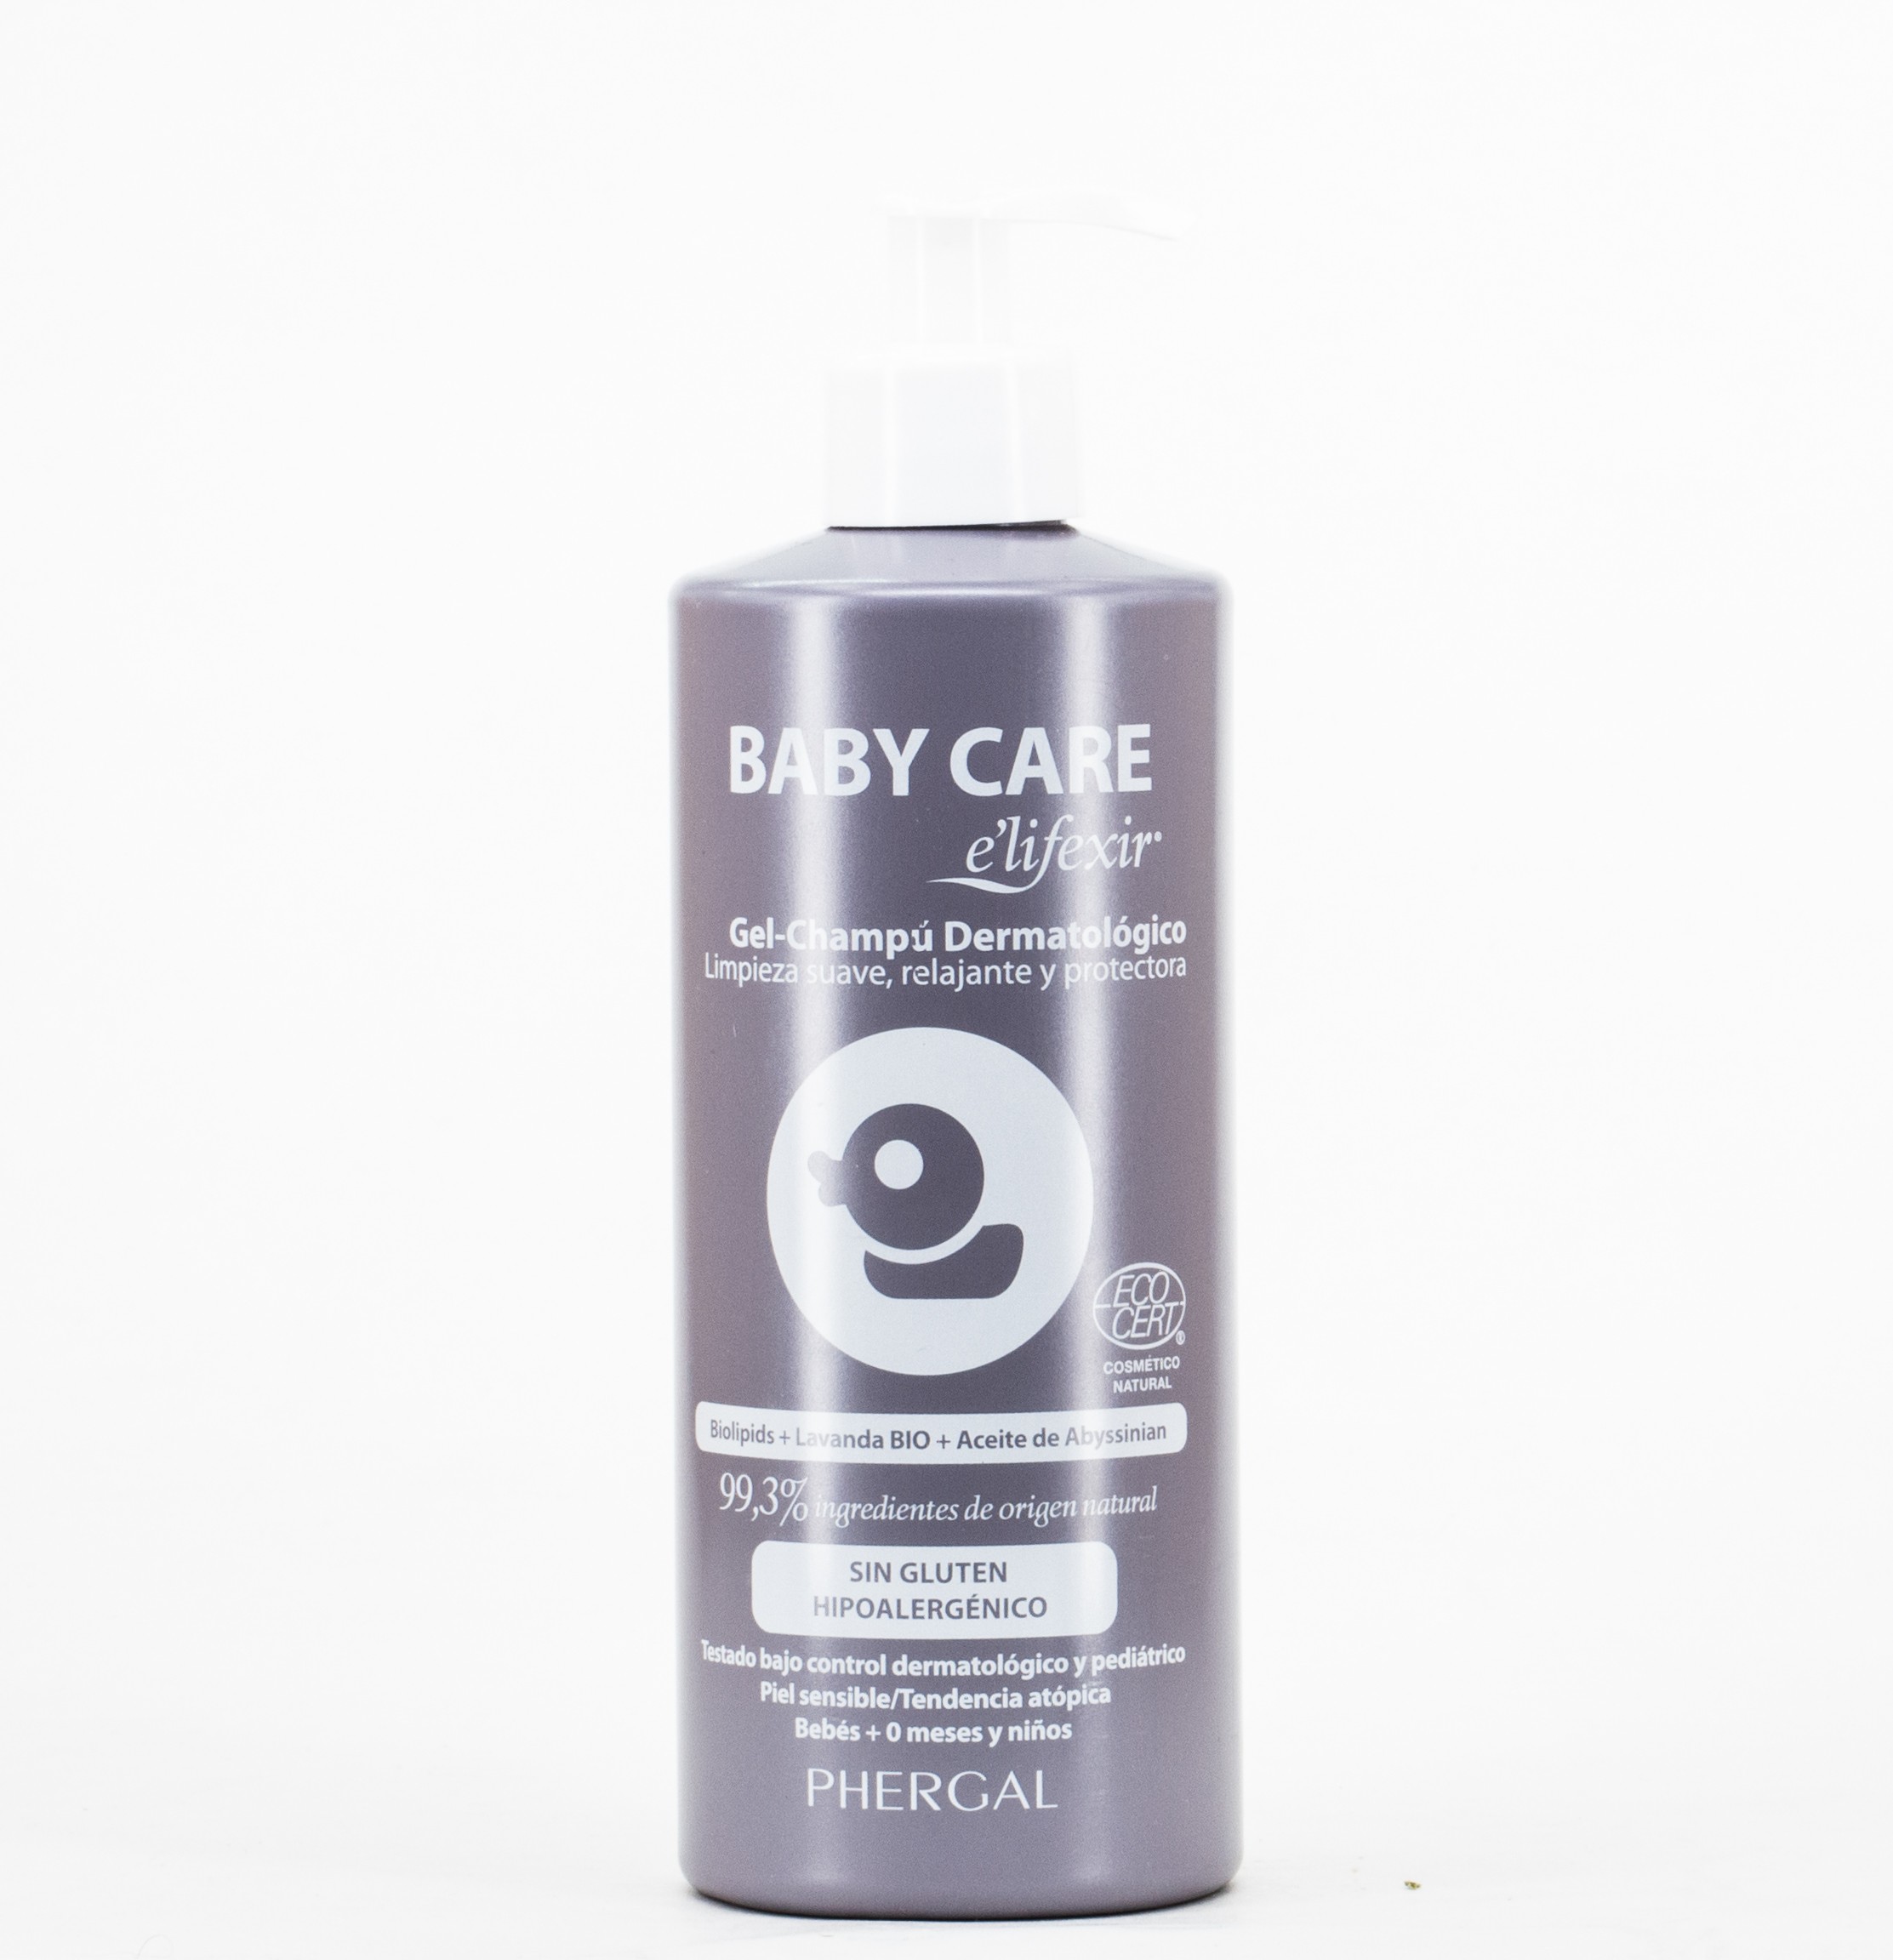 Elifexir Eco Baby Care Gel-Champu 500 ml.